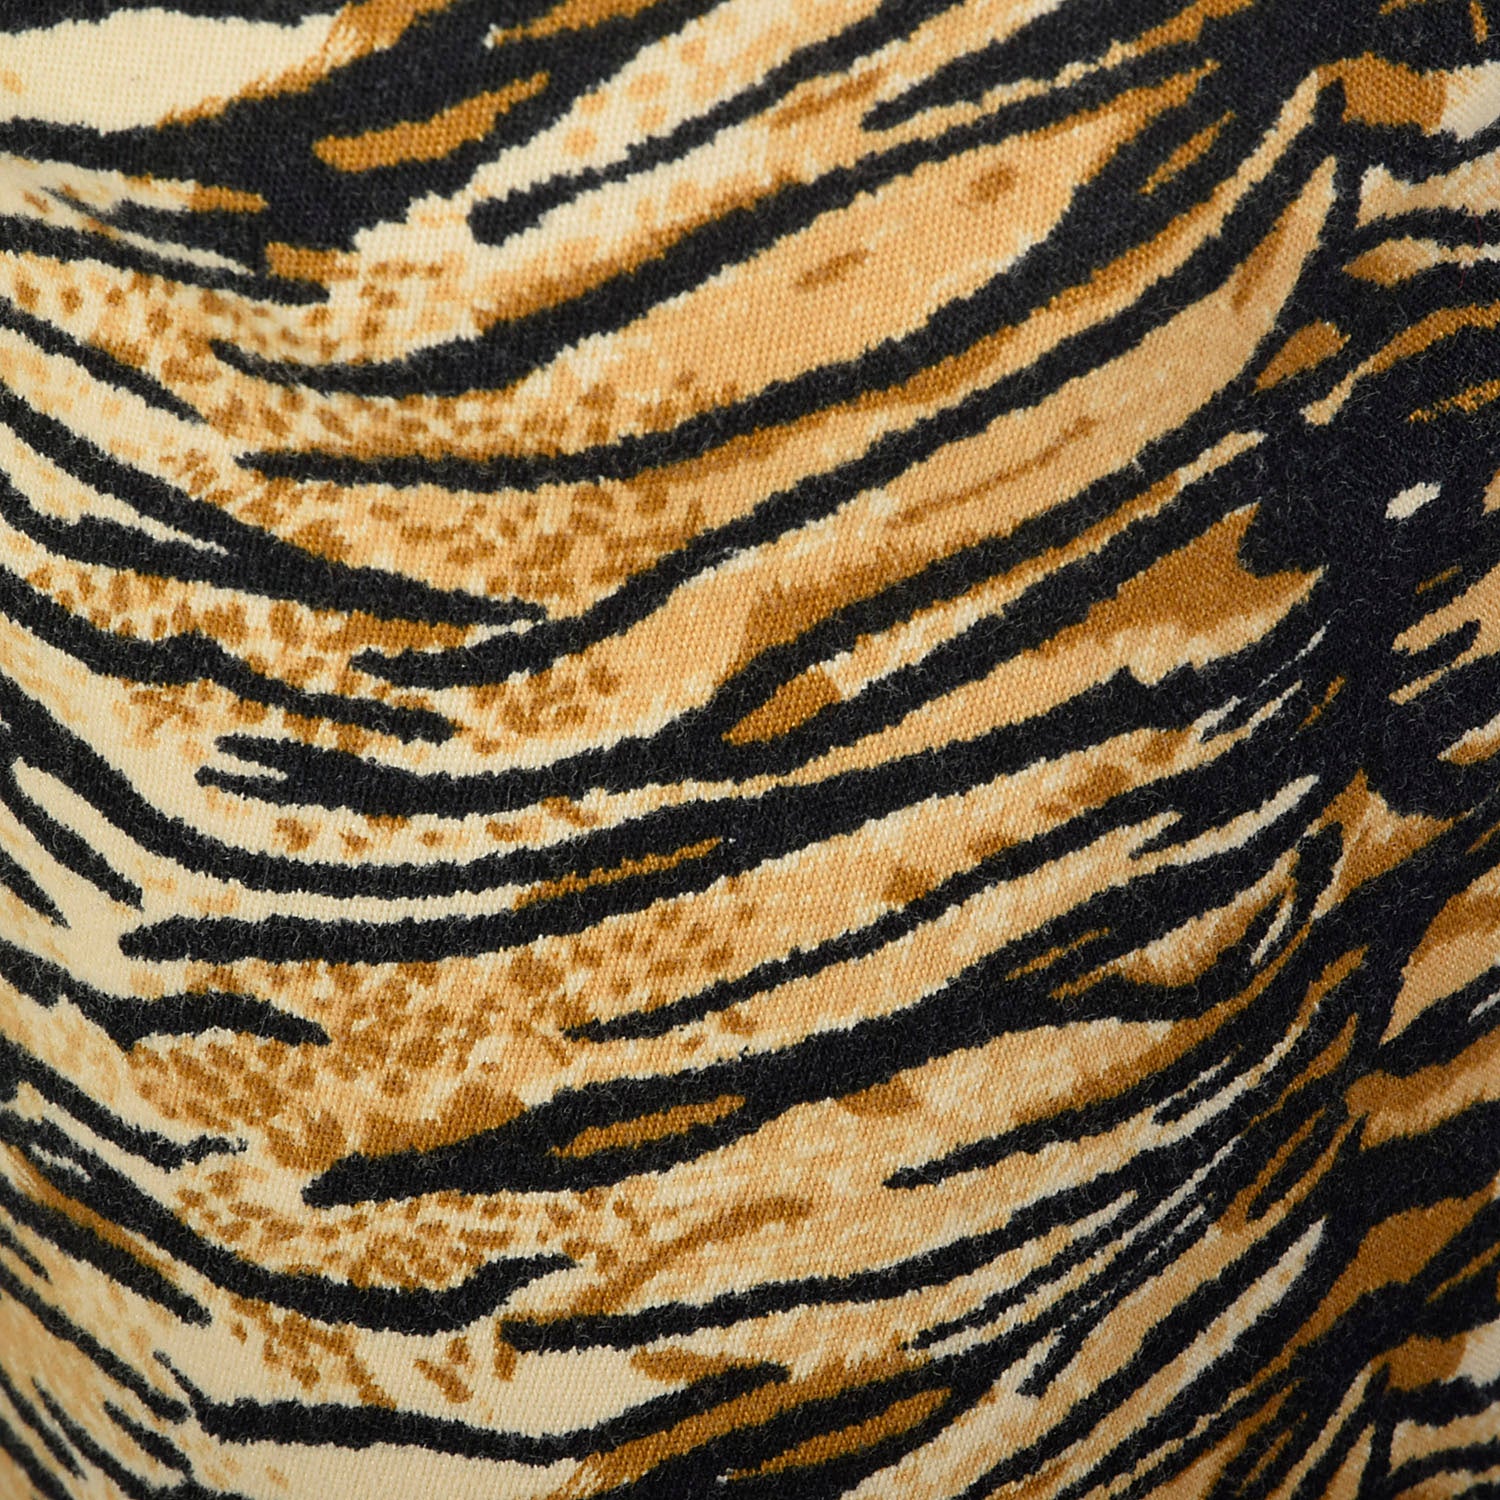 Small Guess Jeans Tiger Stripe Pants Mid Rise Cotton Animal Print